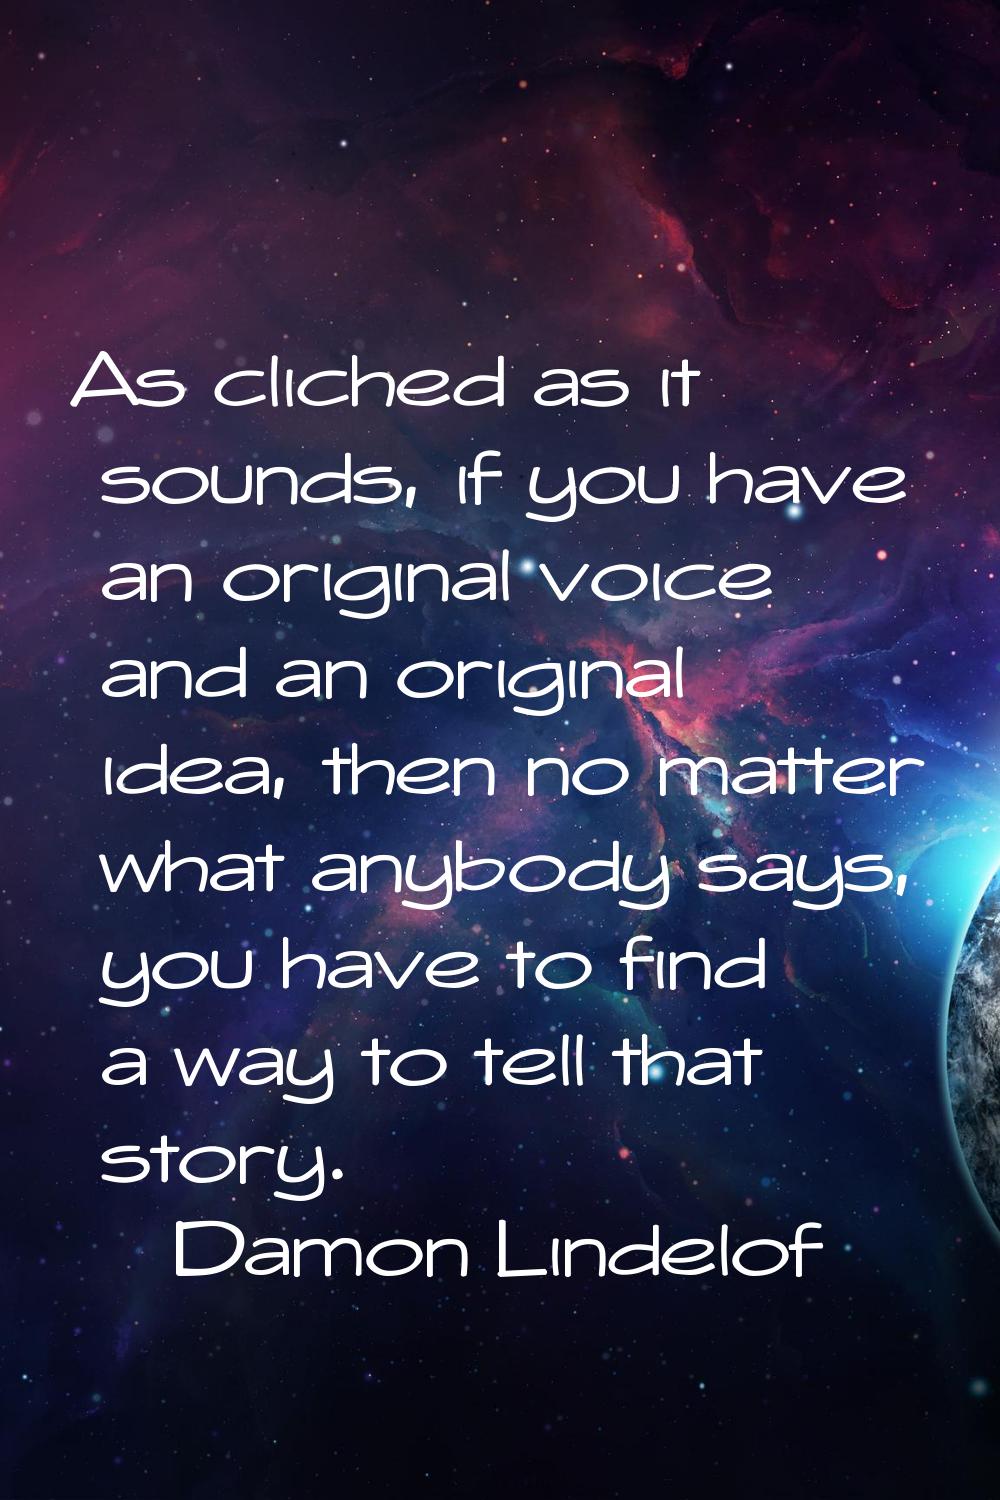 As cliched as it sounds, if you have an original voice and an original idea, then no matter what an